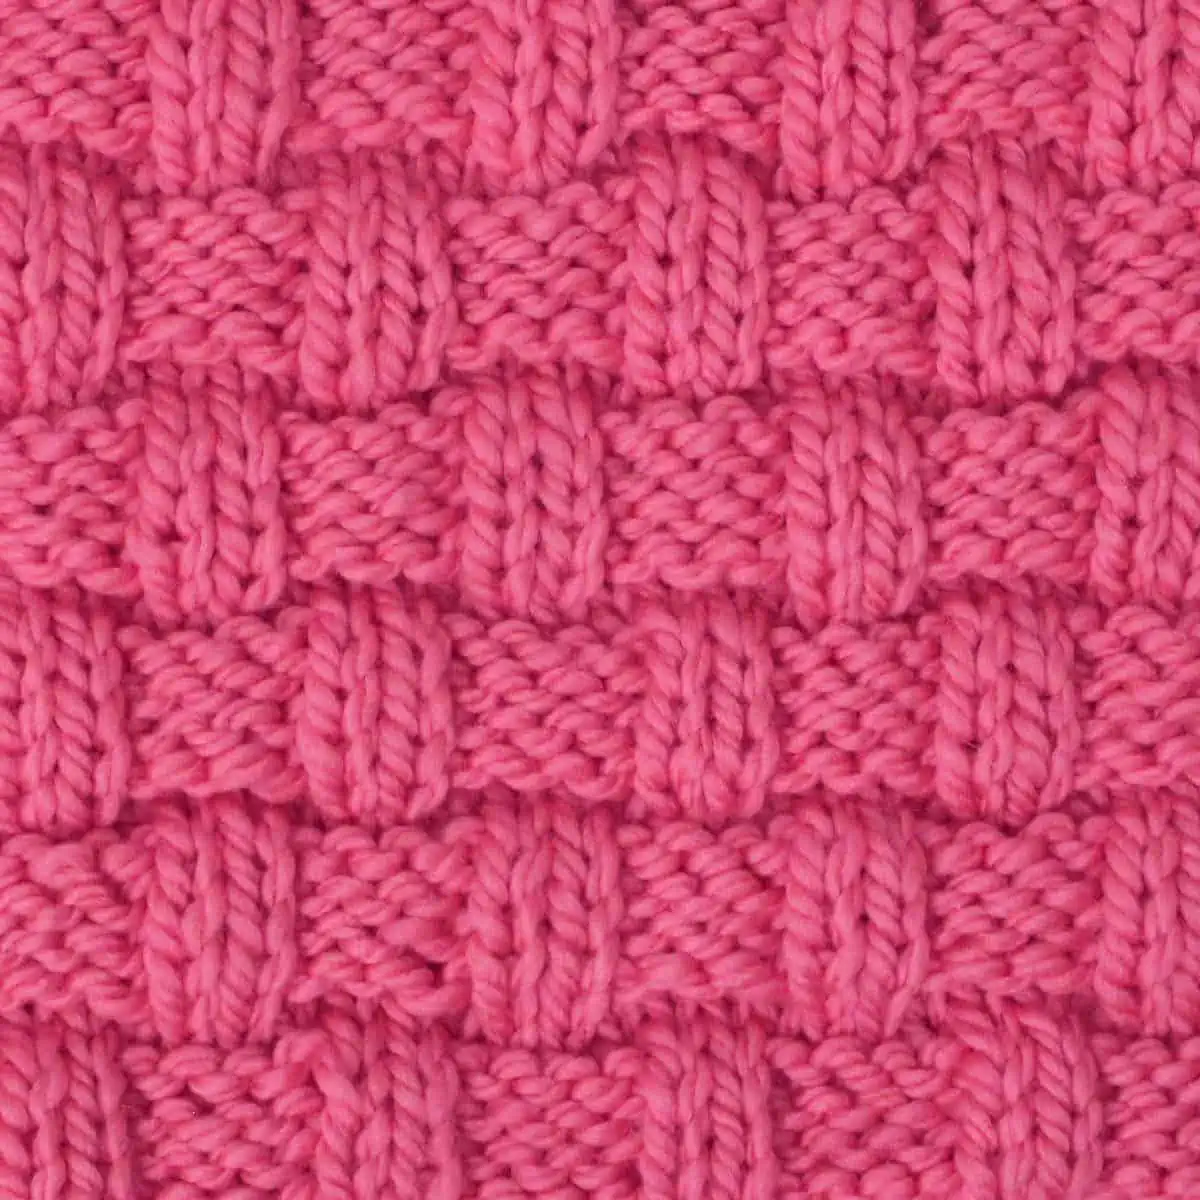 Basket Weave stitch pattern on knitting needle in pink color yarn.